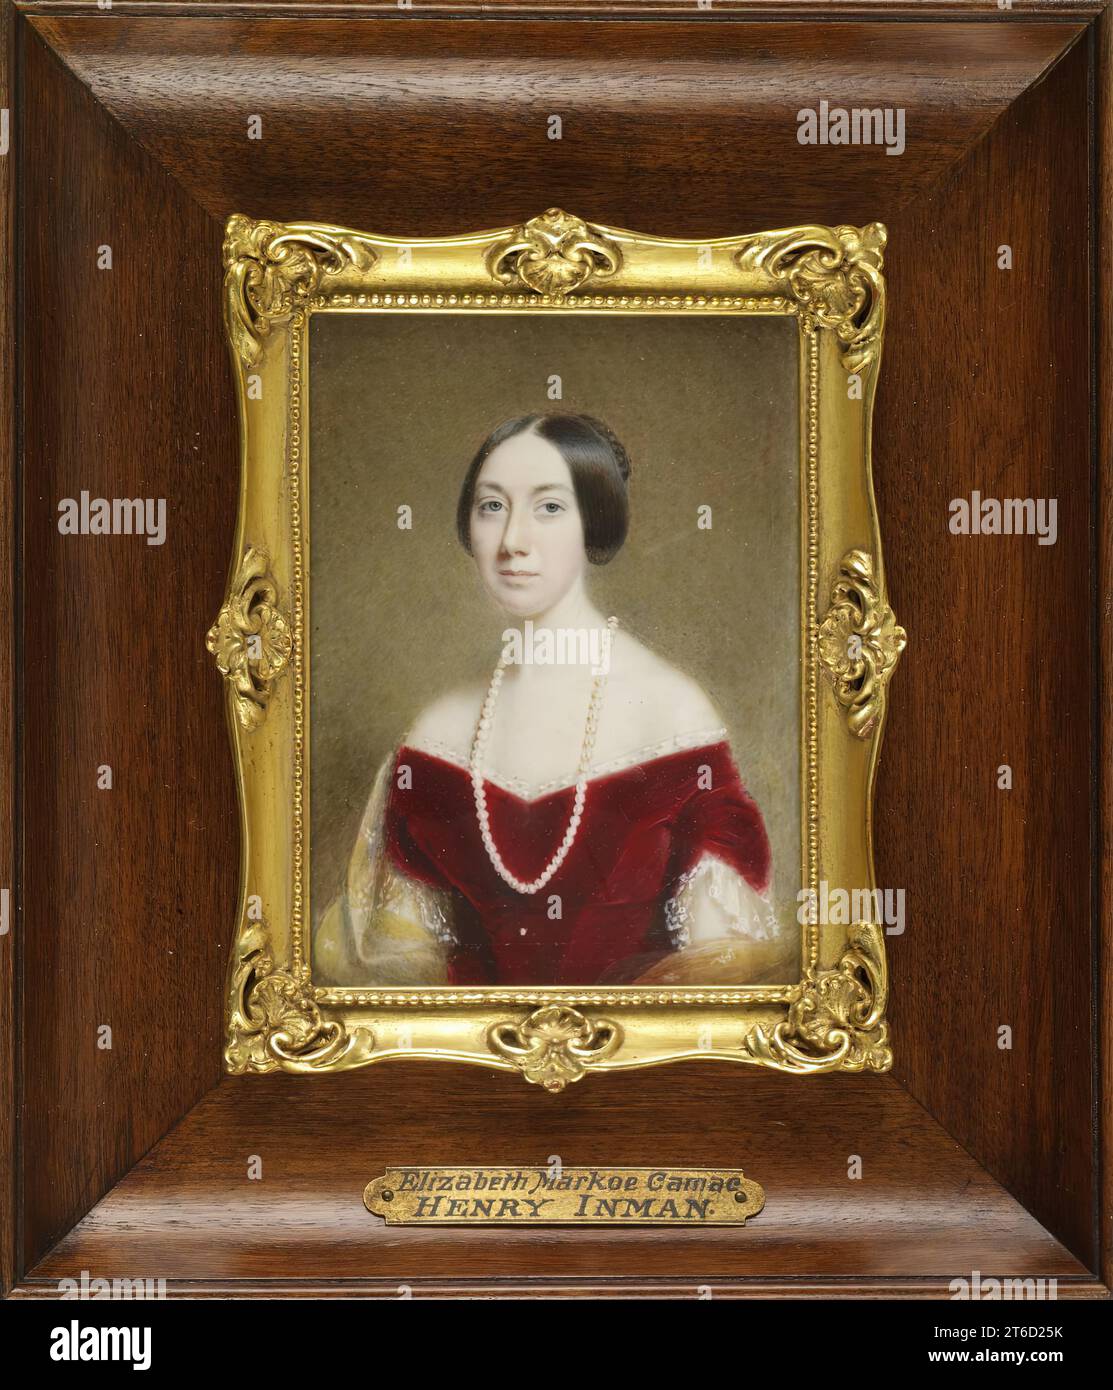 Elizabeth Baynton Markoe Camac, c1840. Waist-length portrait of Elizabeth Baynton Markoe (1807-1886), who married William Masters Camac in 1829. She is shown with straight black hair, parted in the centre, wearing a low-cut red velvet dress with short sleeves trimmed with lace. She has one long strand of pearls around her neck, and a yellow shawl draped over her lower arms. Stock Photo